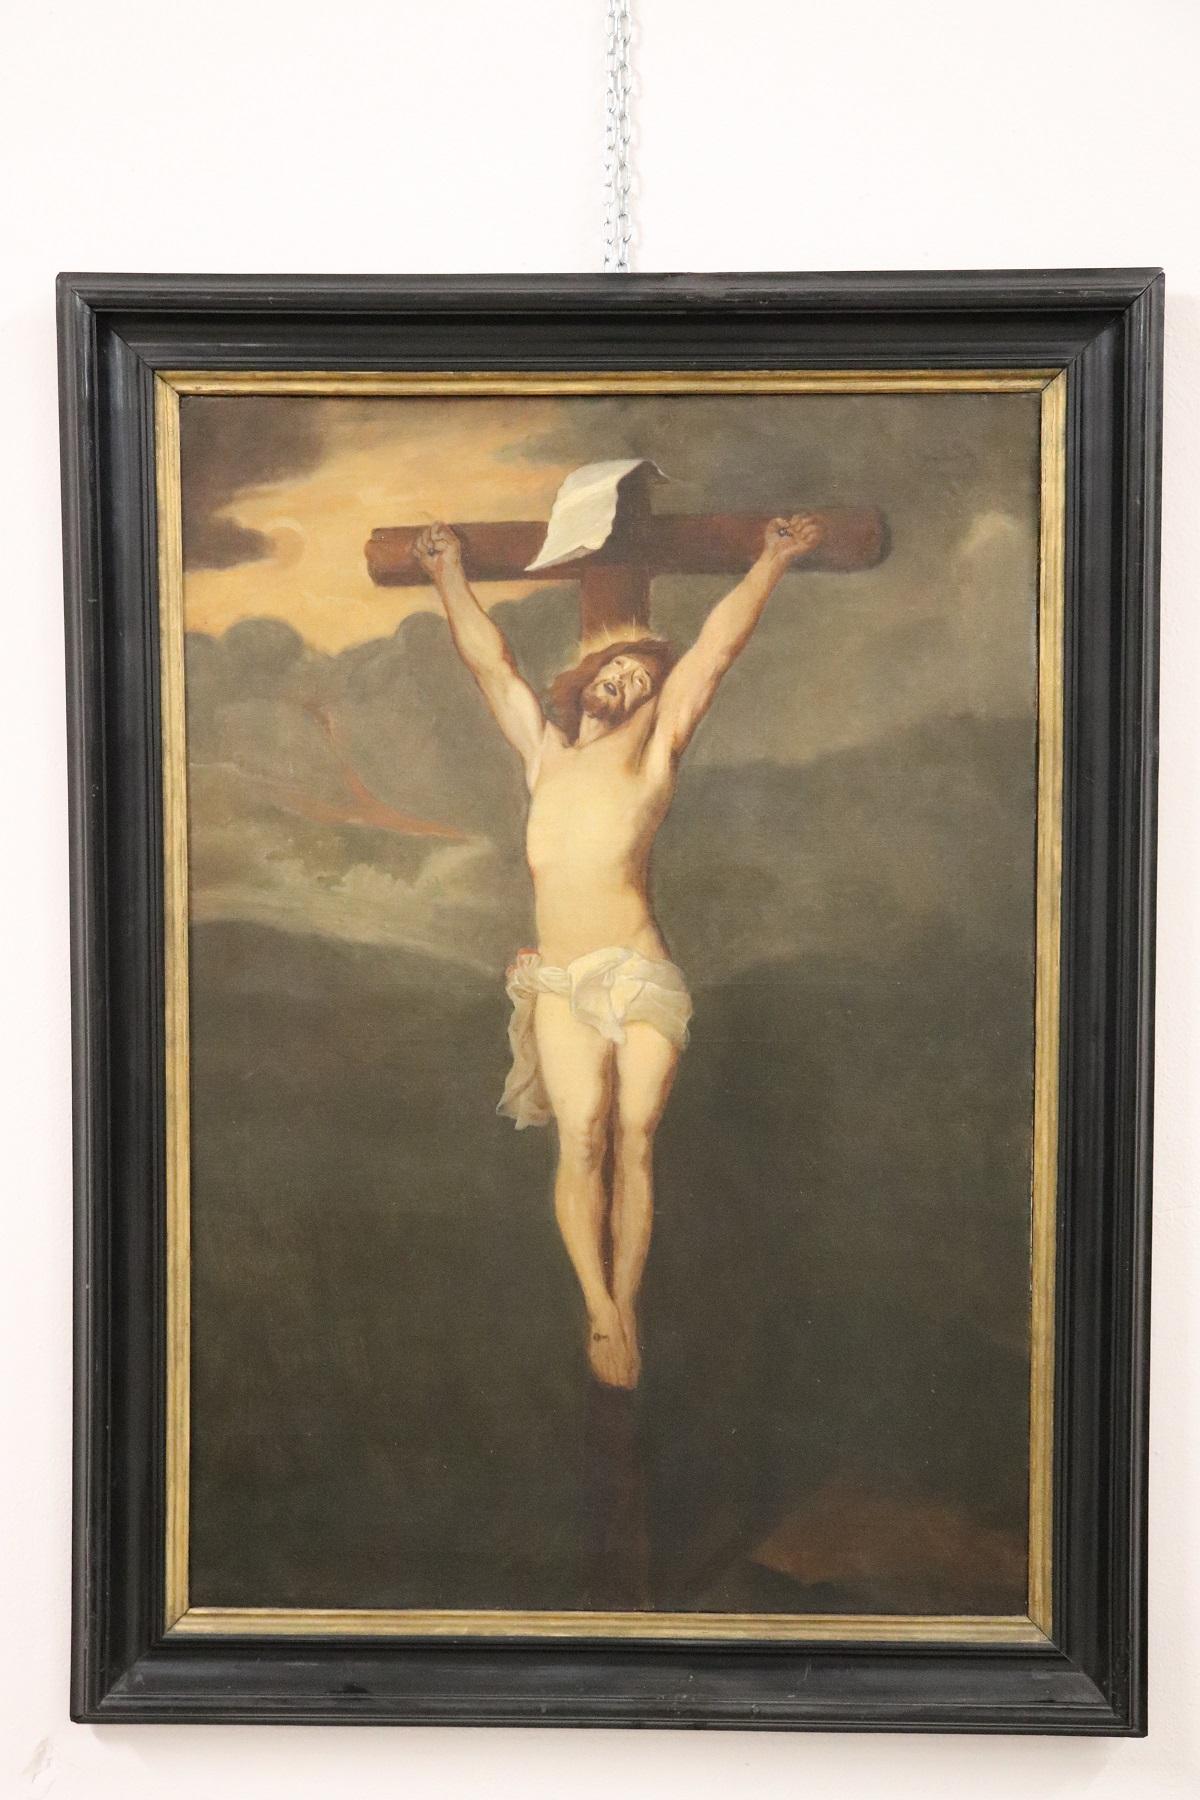 Great oil painting on canvas Crucifixion of Jesus scene. Excellent pictorial quality Jesus is depicted in the cross his face perfectly shows the pain. The body is made with excellent precision. The landscape at the back is very dark to underline